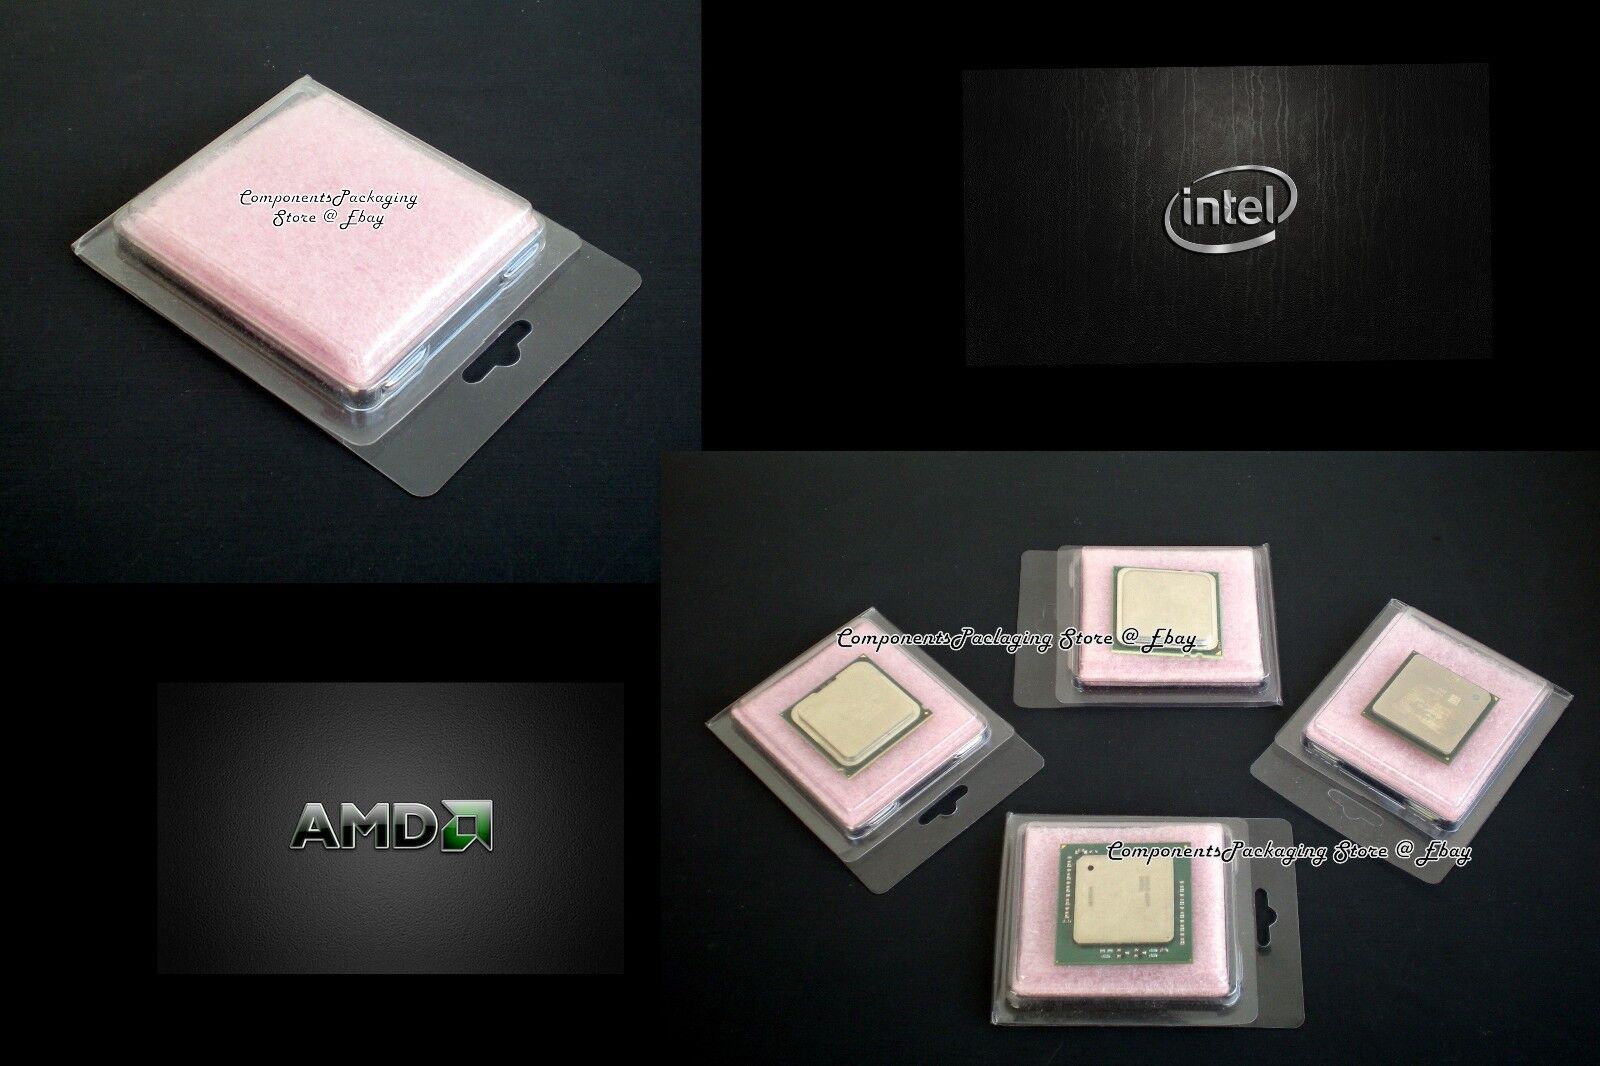 Processor Clamshell for Intel AMD CPU's - Sold in Lot of 10 25 40 80 & 250 - New